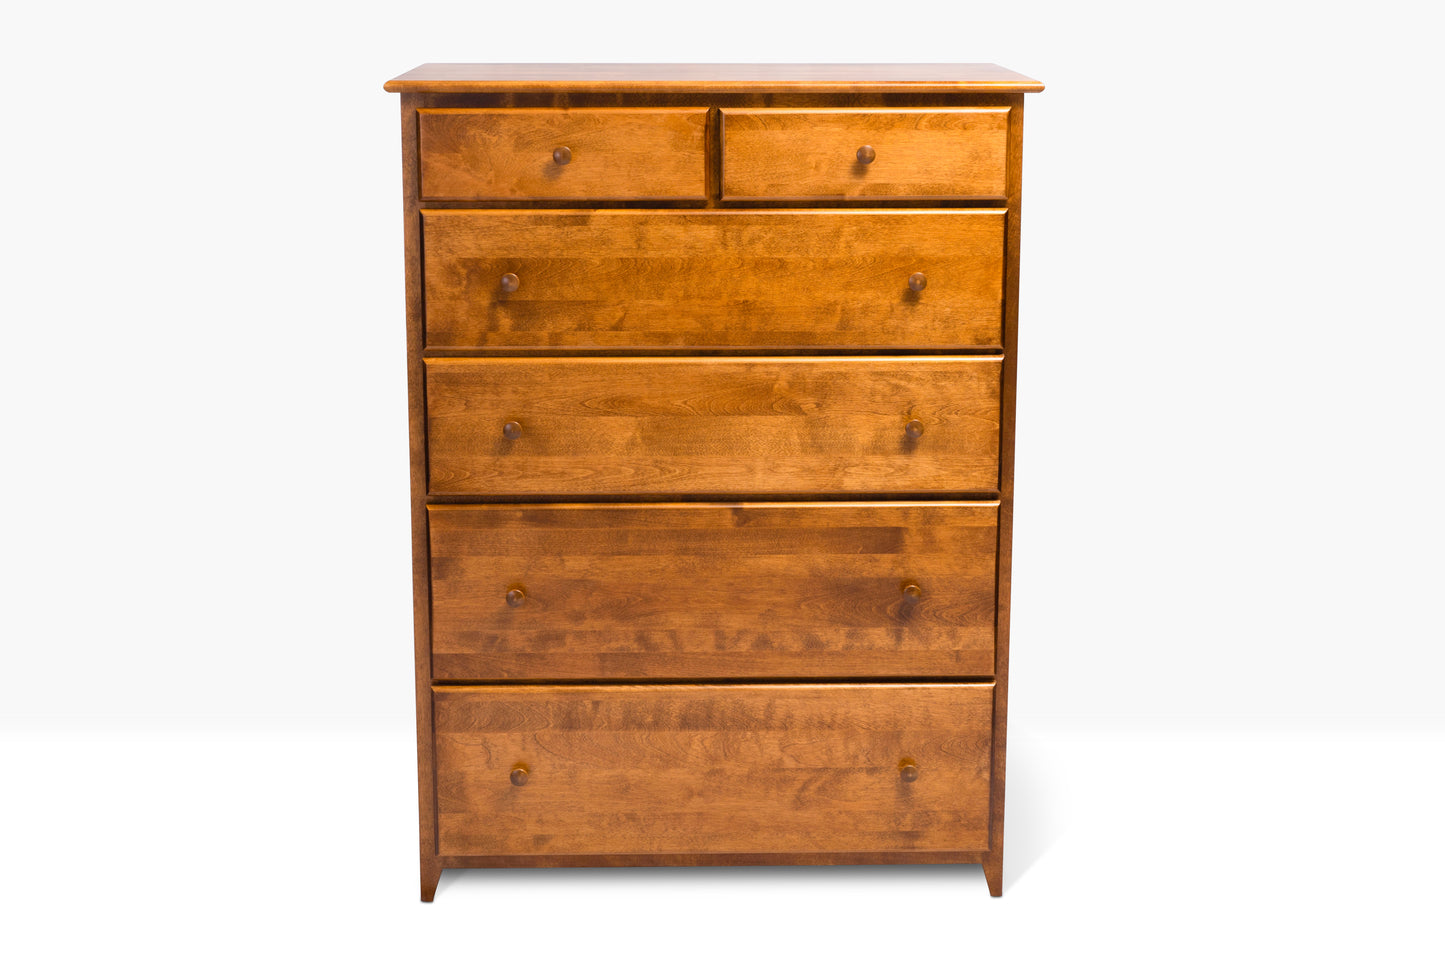 Acadia Shaker Chest with Split Top Drawer with four large drawers and two small drawers. Pictured in Walnut.